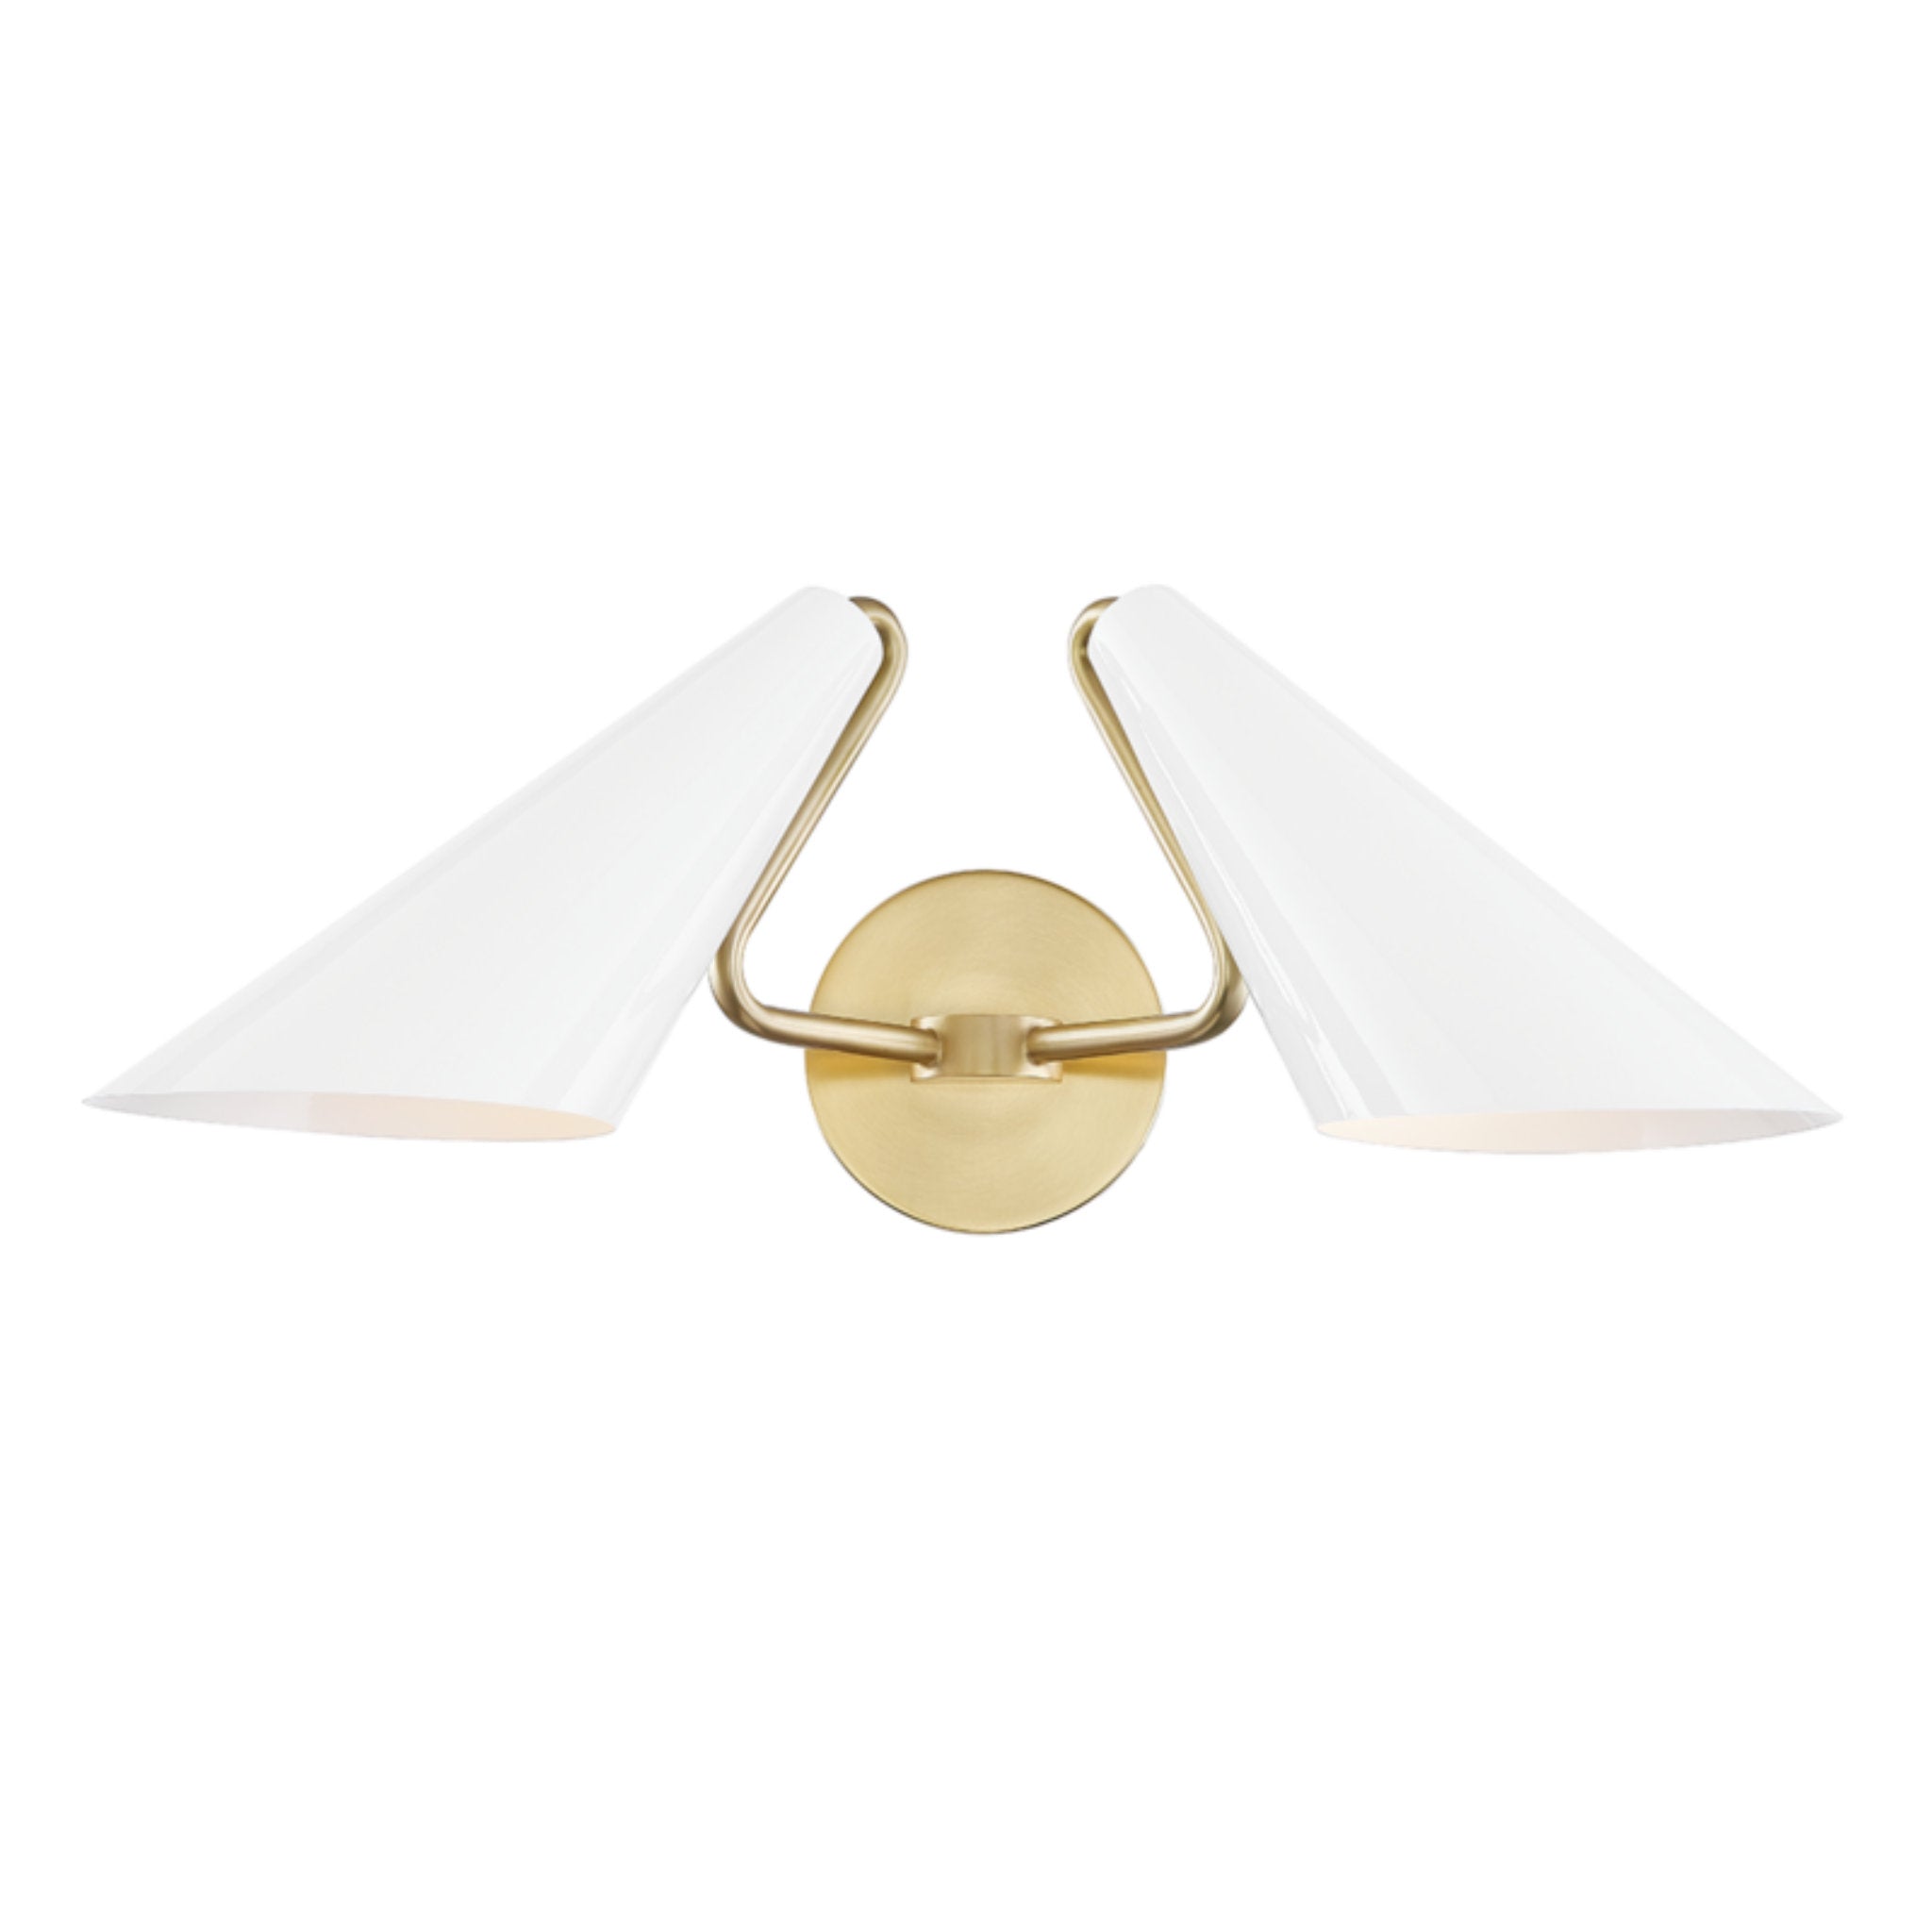 Talia 2-Light Wall Sconce in Aged Brass/Dove Gray Combo